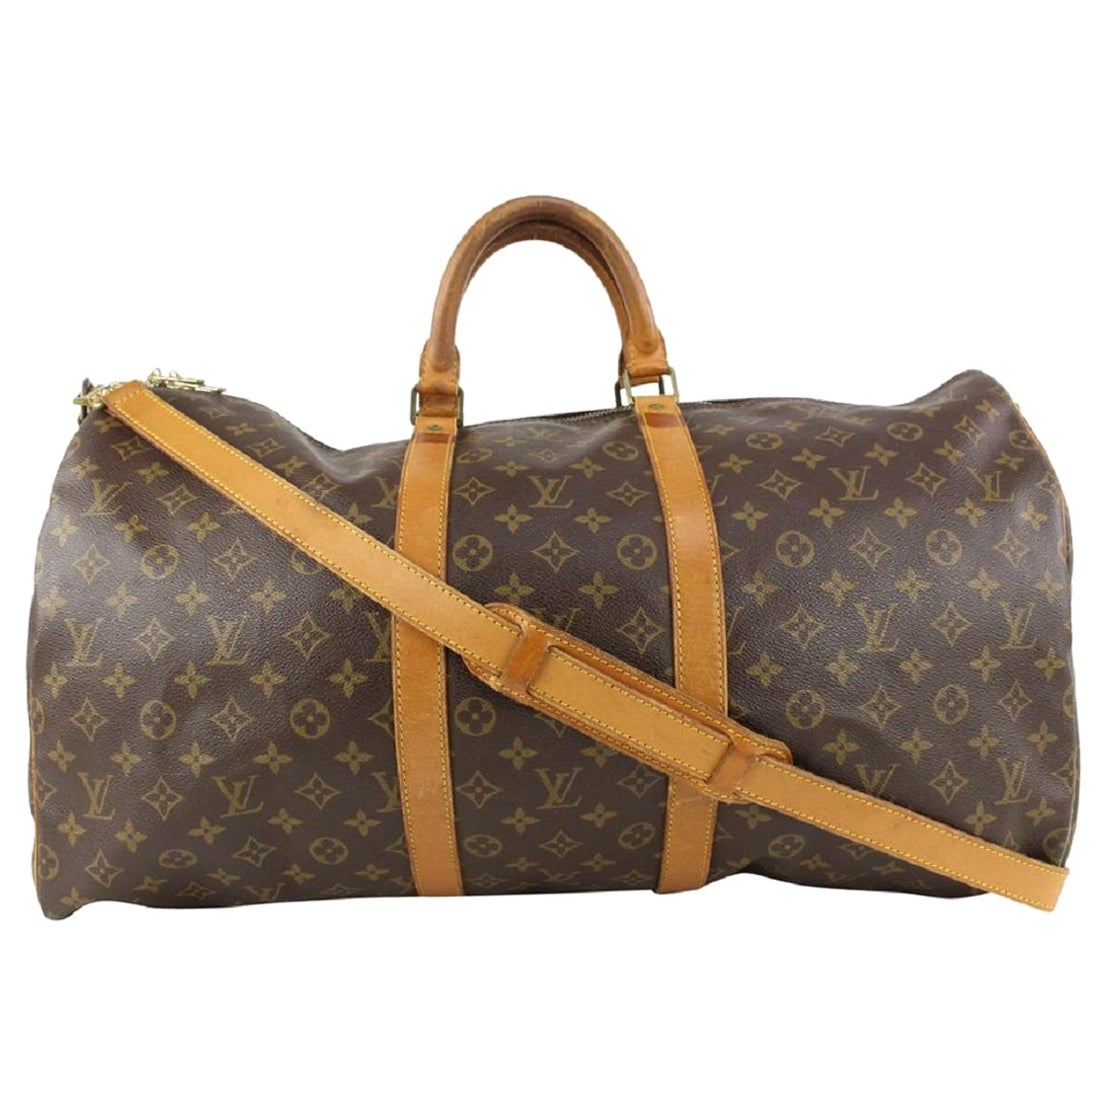 Louis Vuitton Monogram Keepall Bandouliere 55 Duffle Bag with Strap 921lv77 For Sale